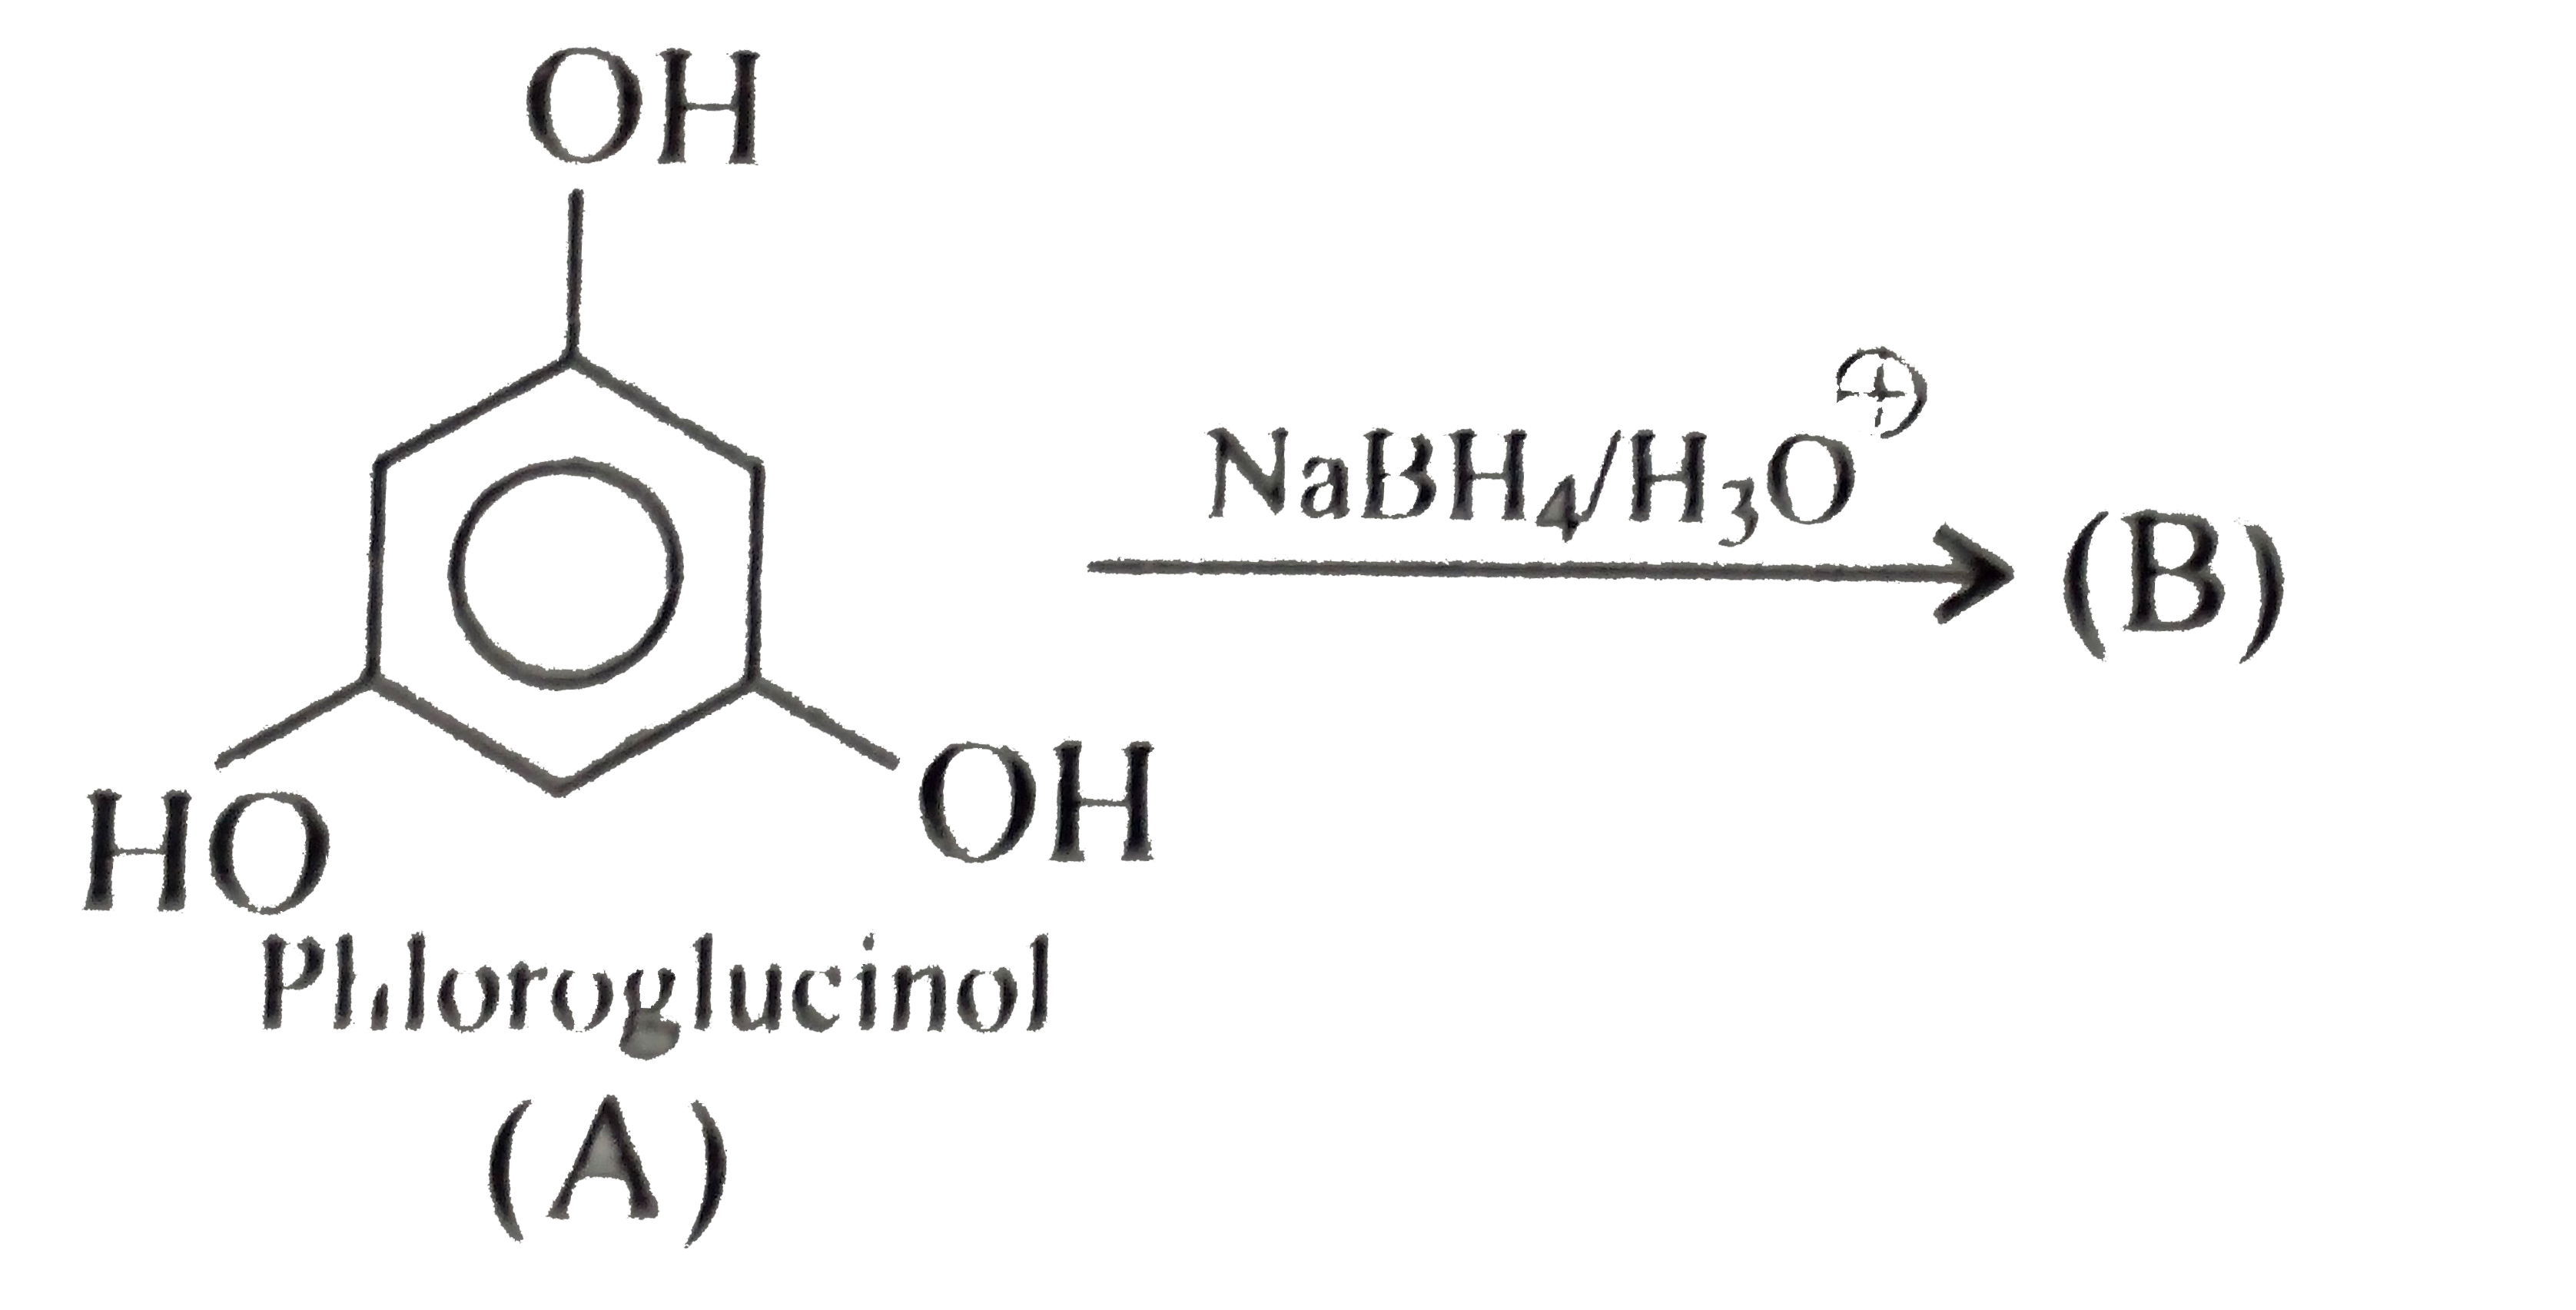 Phenols are generally charged with NaBH(4)//H(3)O^(o+) 1,3- and 1,4-benzenediols and 1,3,5-benzenetriols are unchanged under these conditions. However, 1,3,5-benzenetriol (phloroglucinol) gives a high yield of product (B).